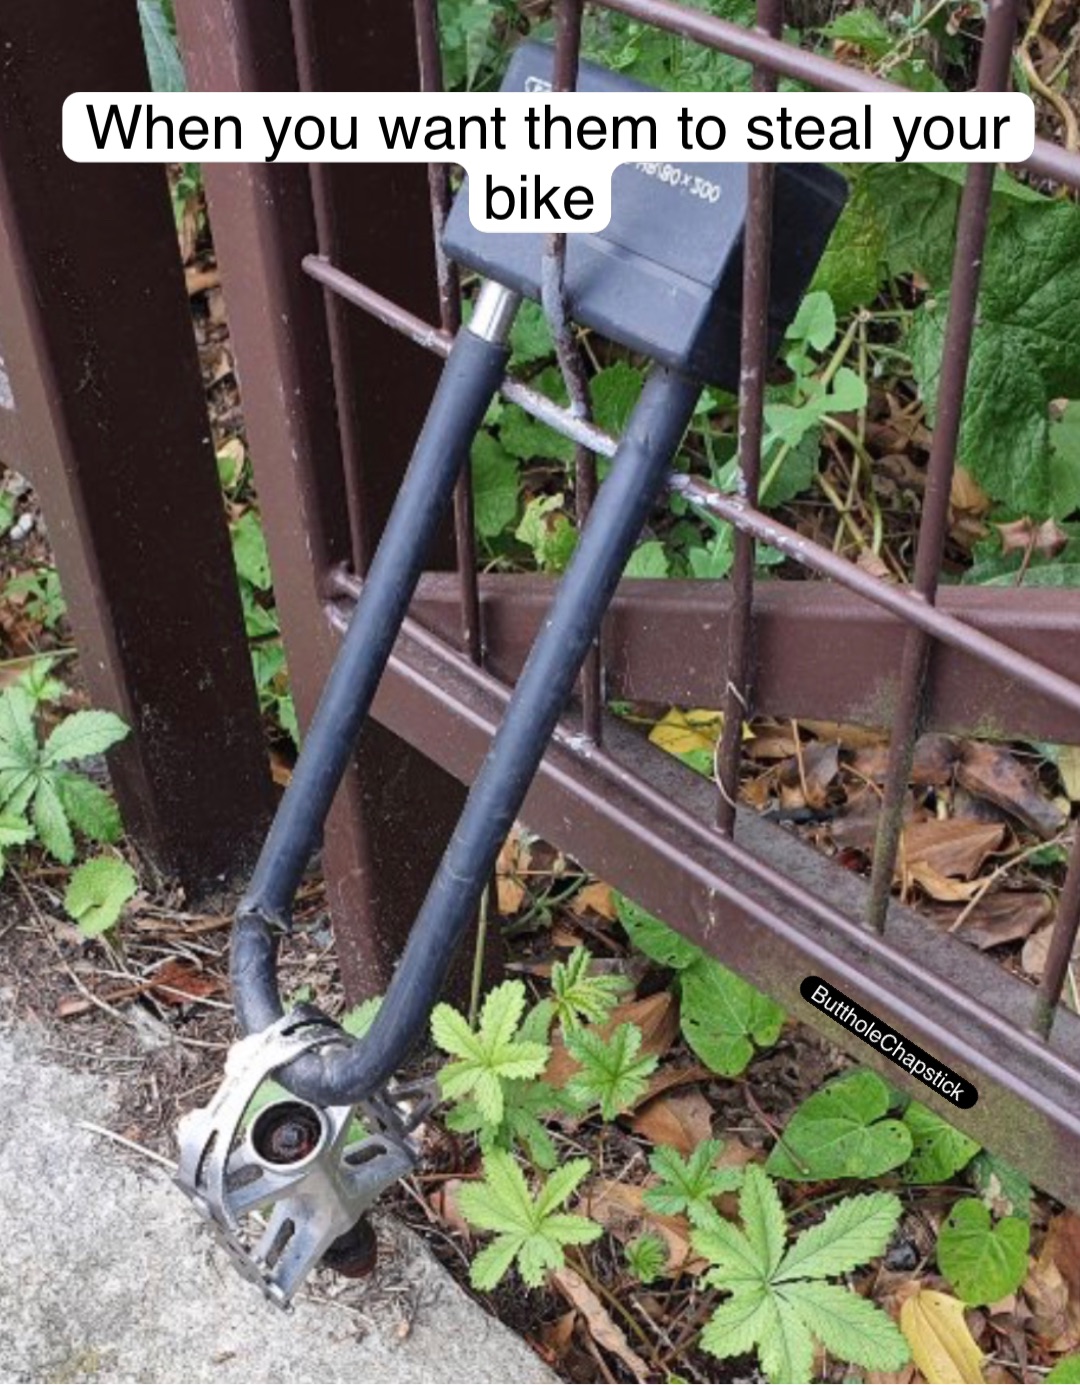 When you want them to steal your bike